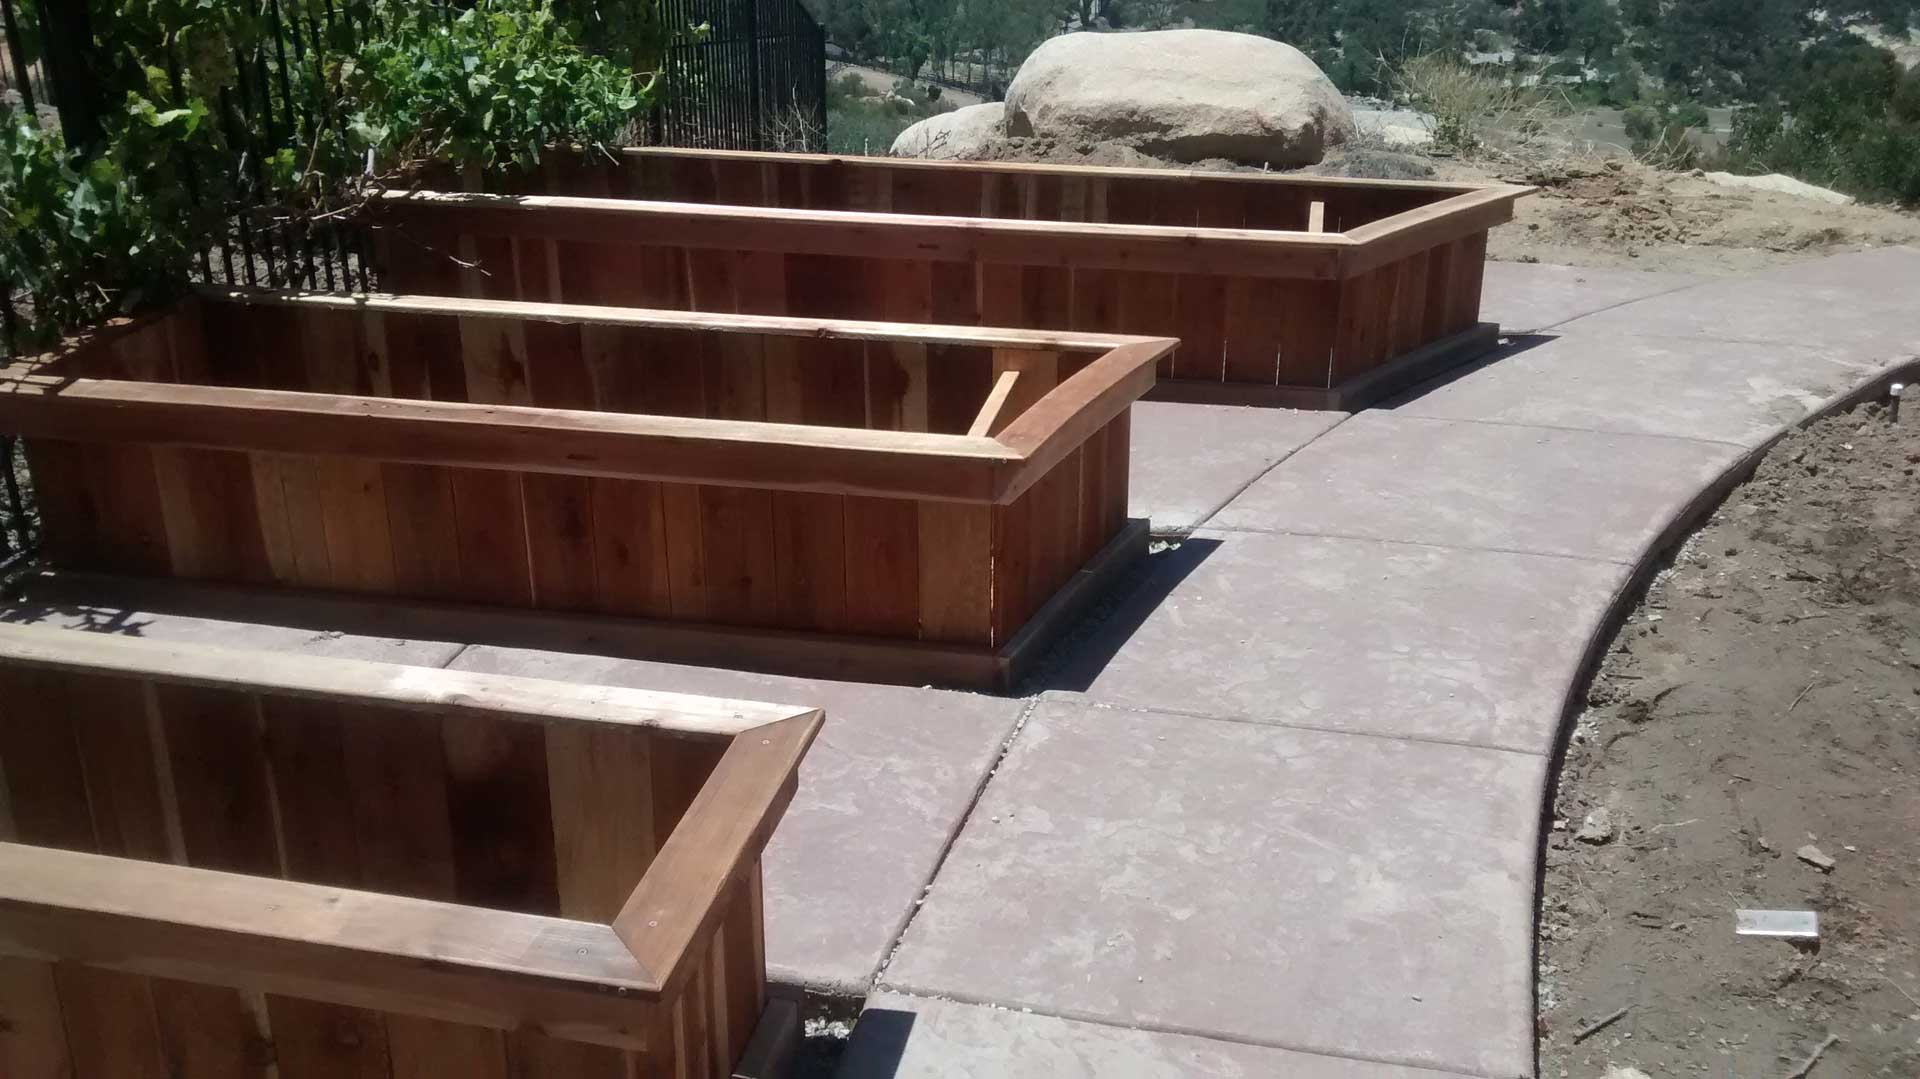 Three wooden planters on the side of a sidewalk.